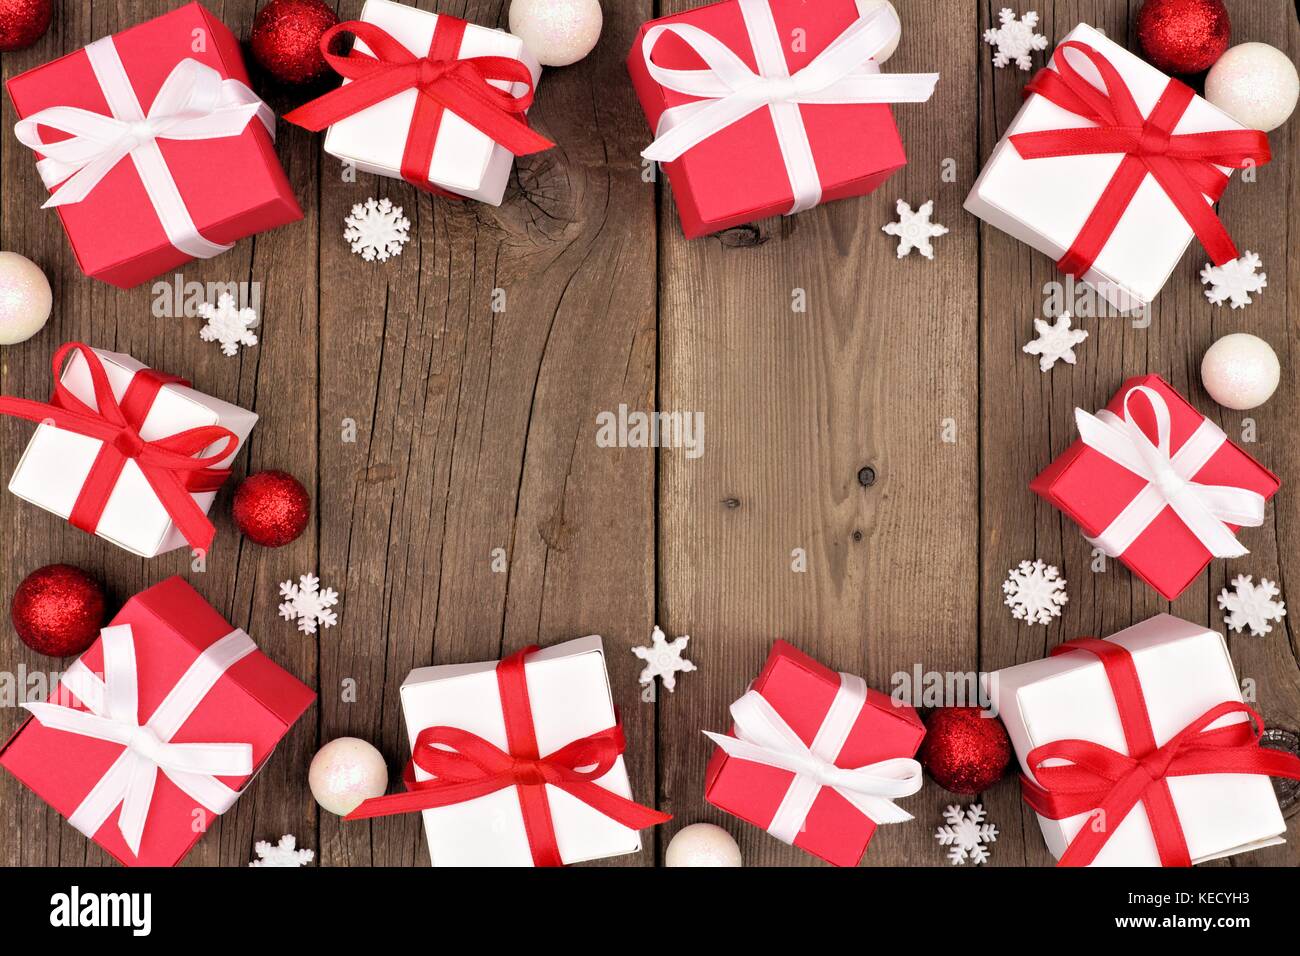 Red and white Christmas gift box frame over a rustic wood background Stock Photo